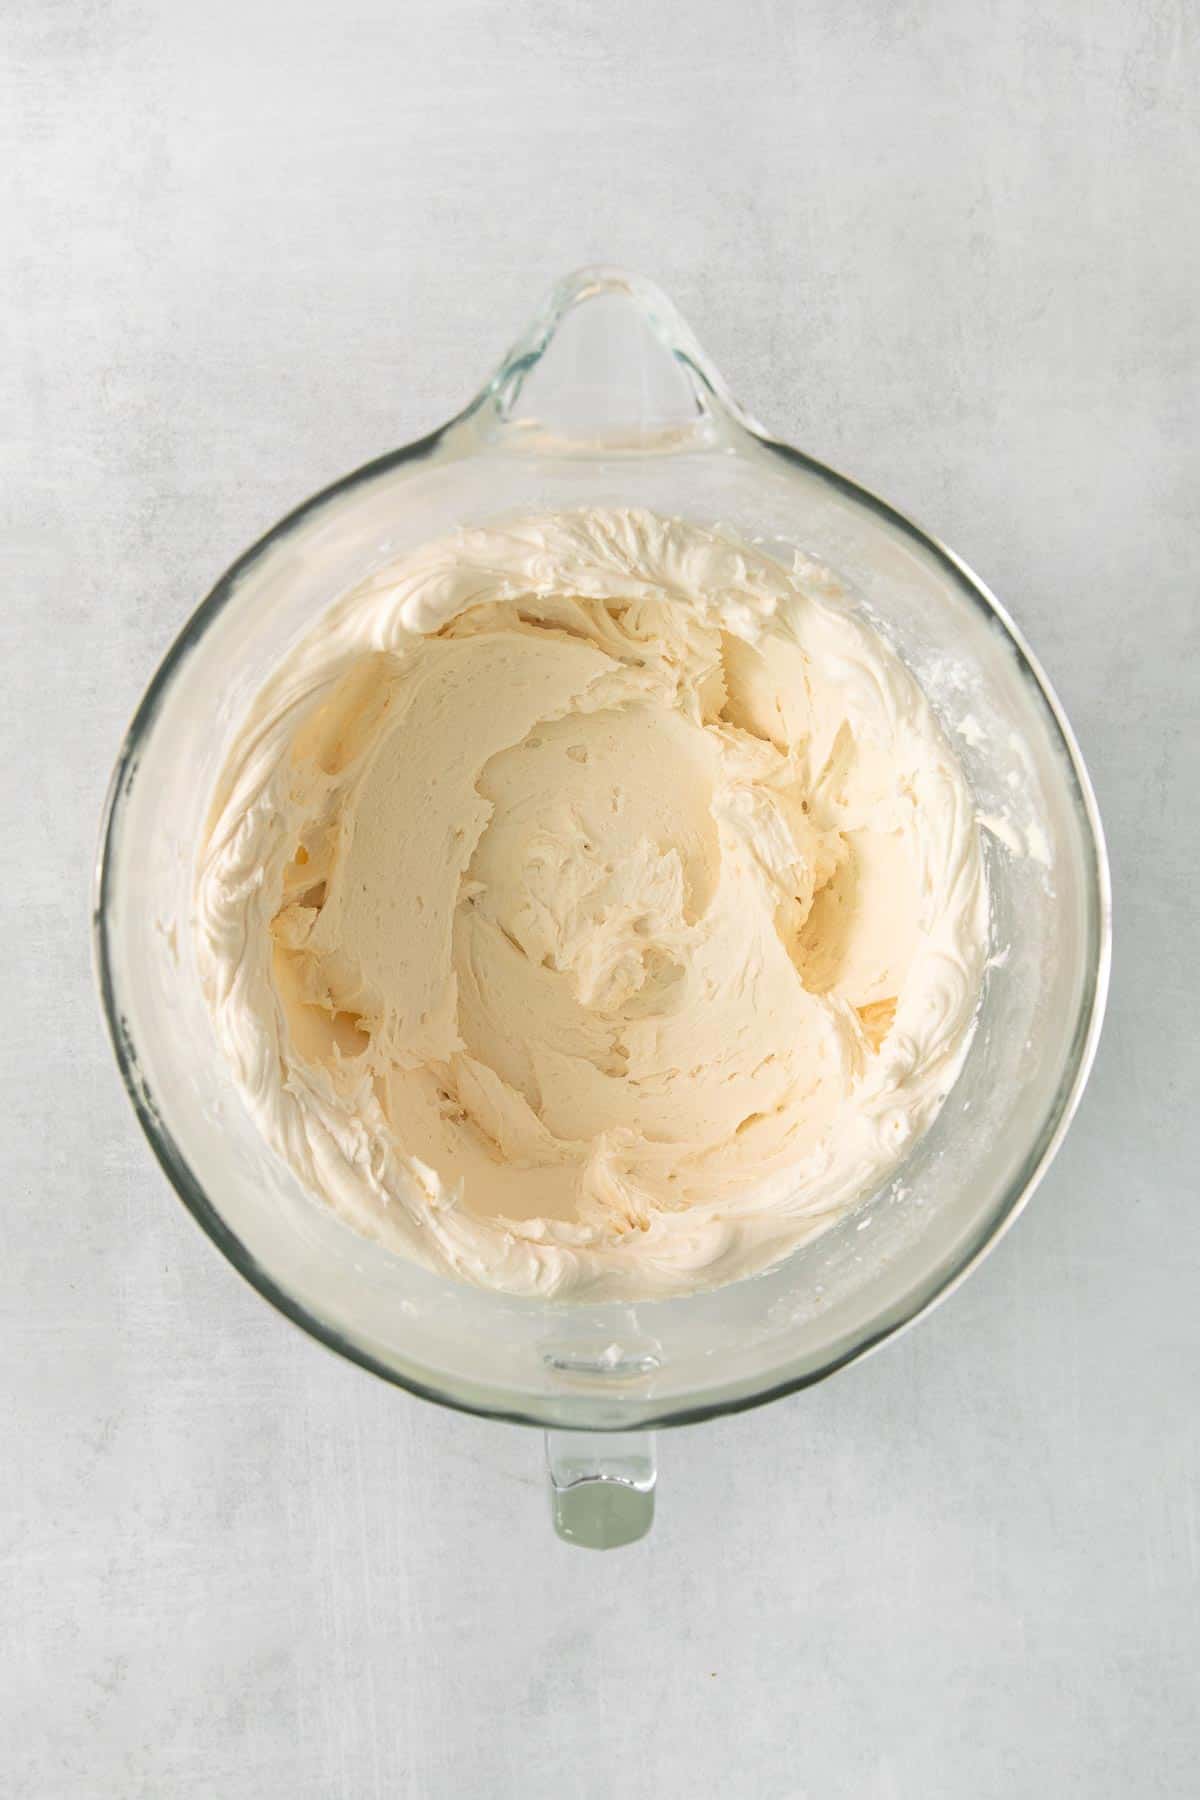 Cream cheese frosting in a glass mixing bowl